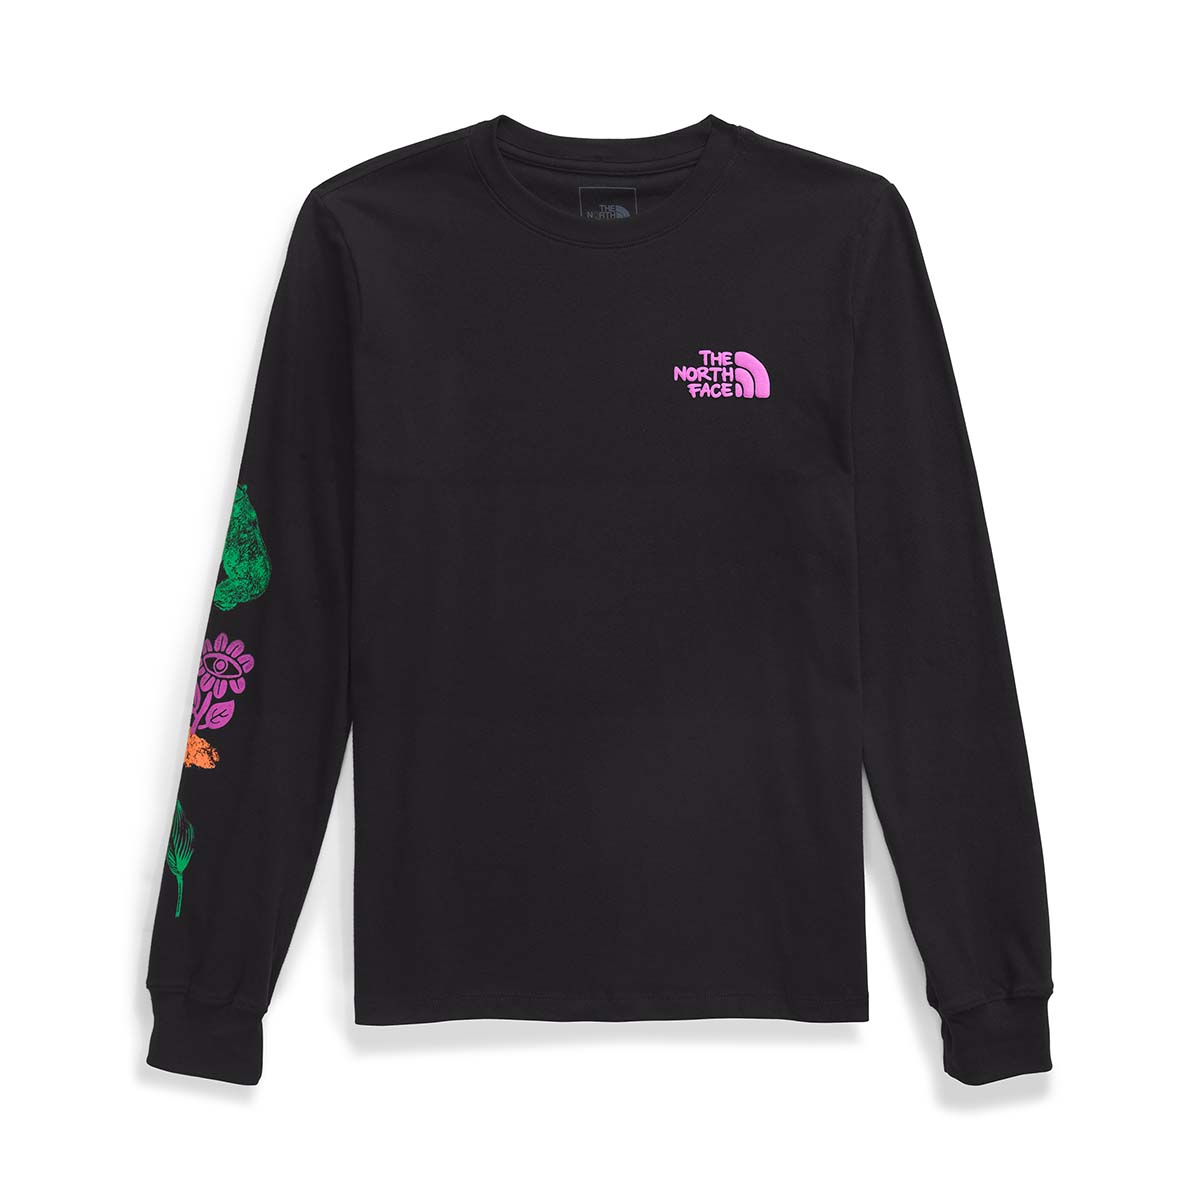 The North Face Women's Long-Sleeve Outdoors Together Tee